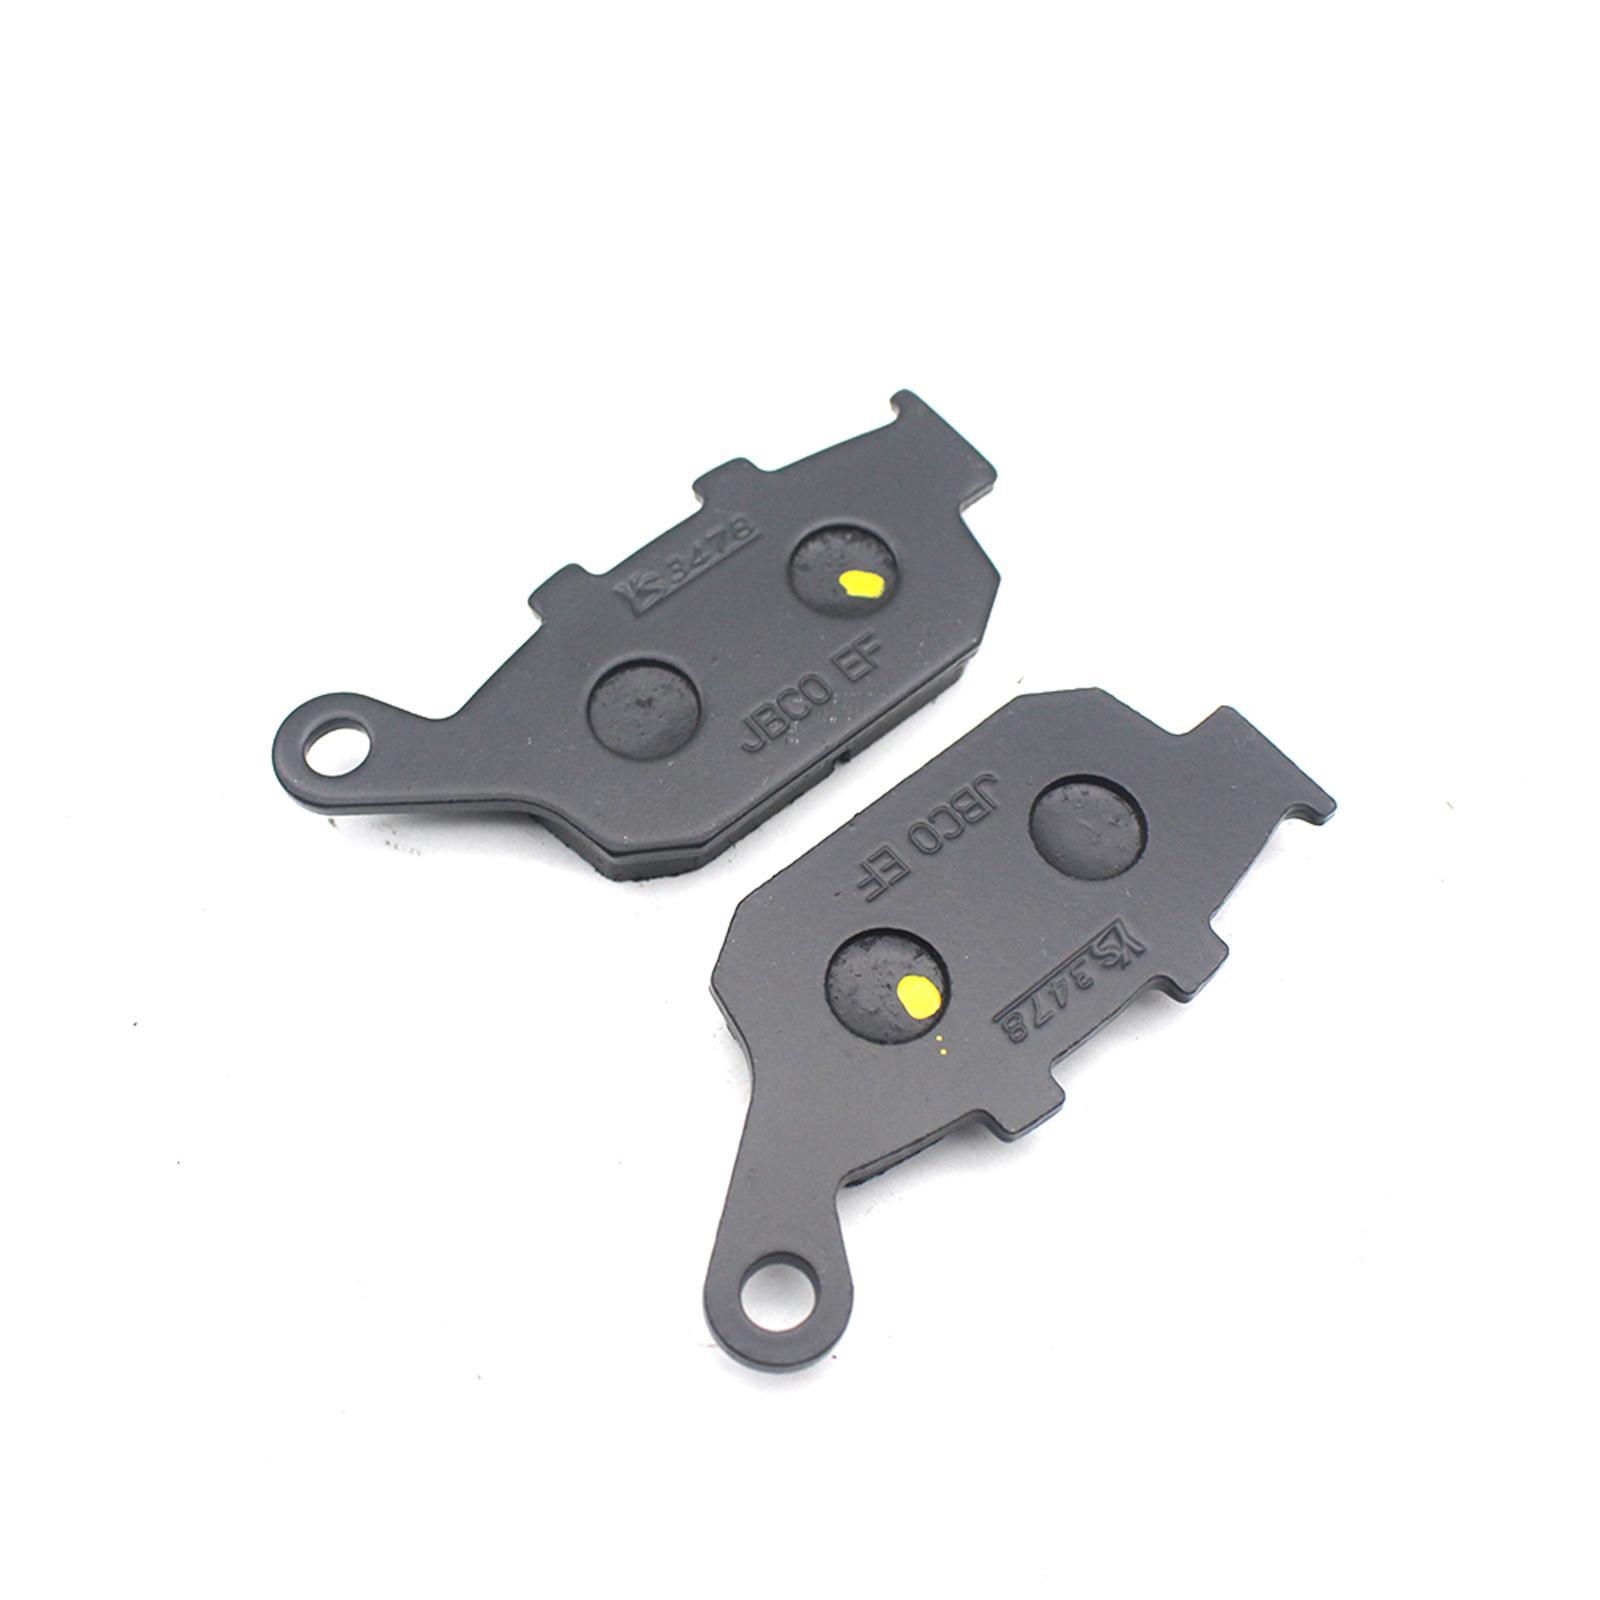 Motorcycle Brake Pads CB650R ABS 2019-2021 Replacement Part for